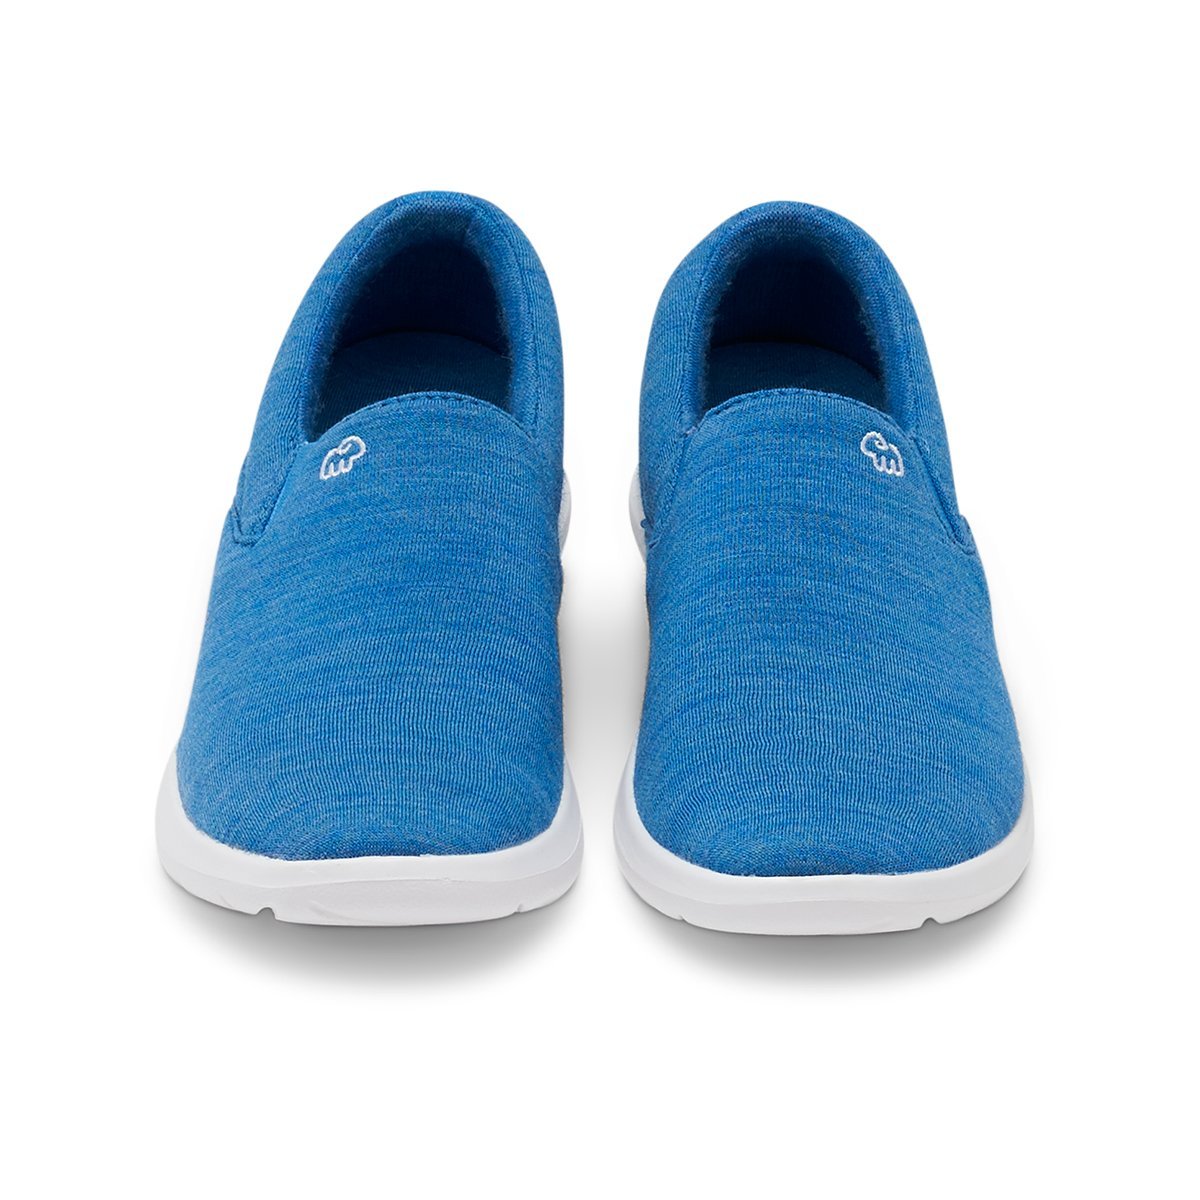 Women's Slip-Ons Bright Blue - Special Offer